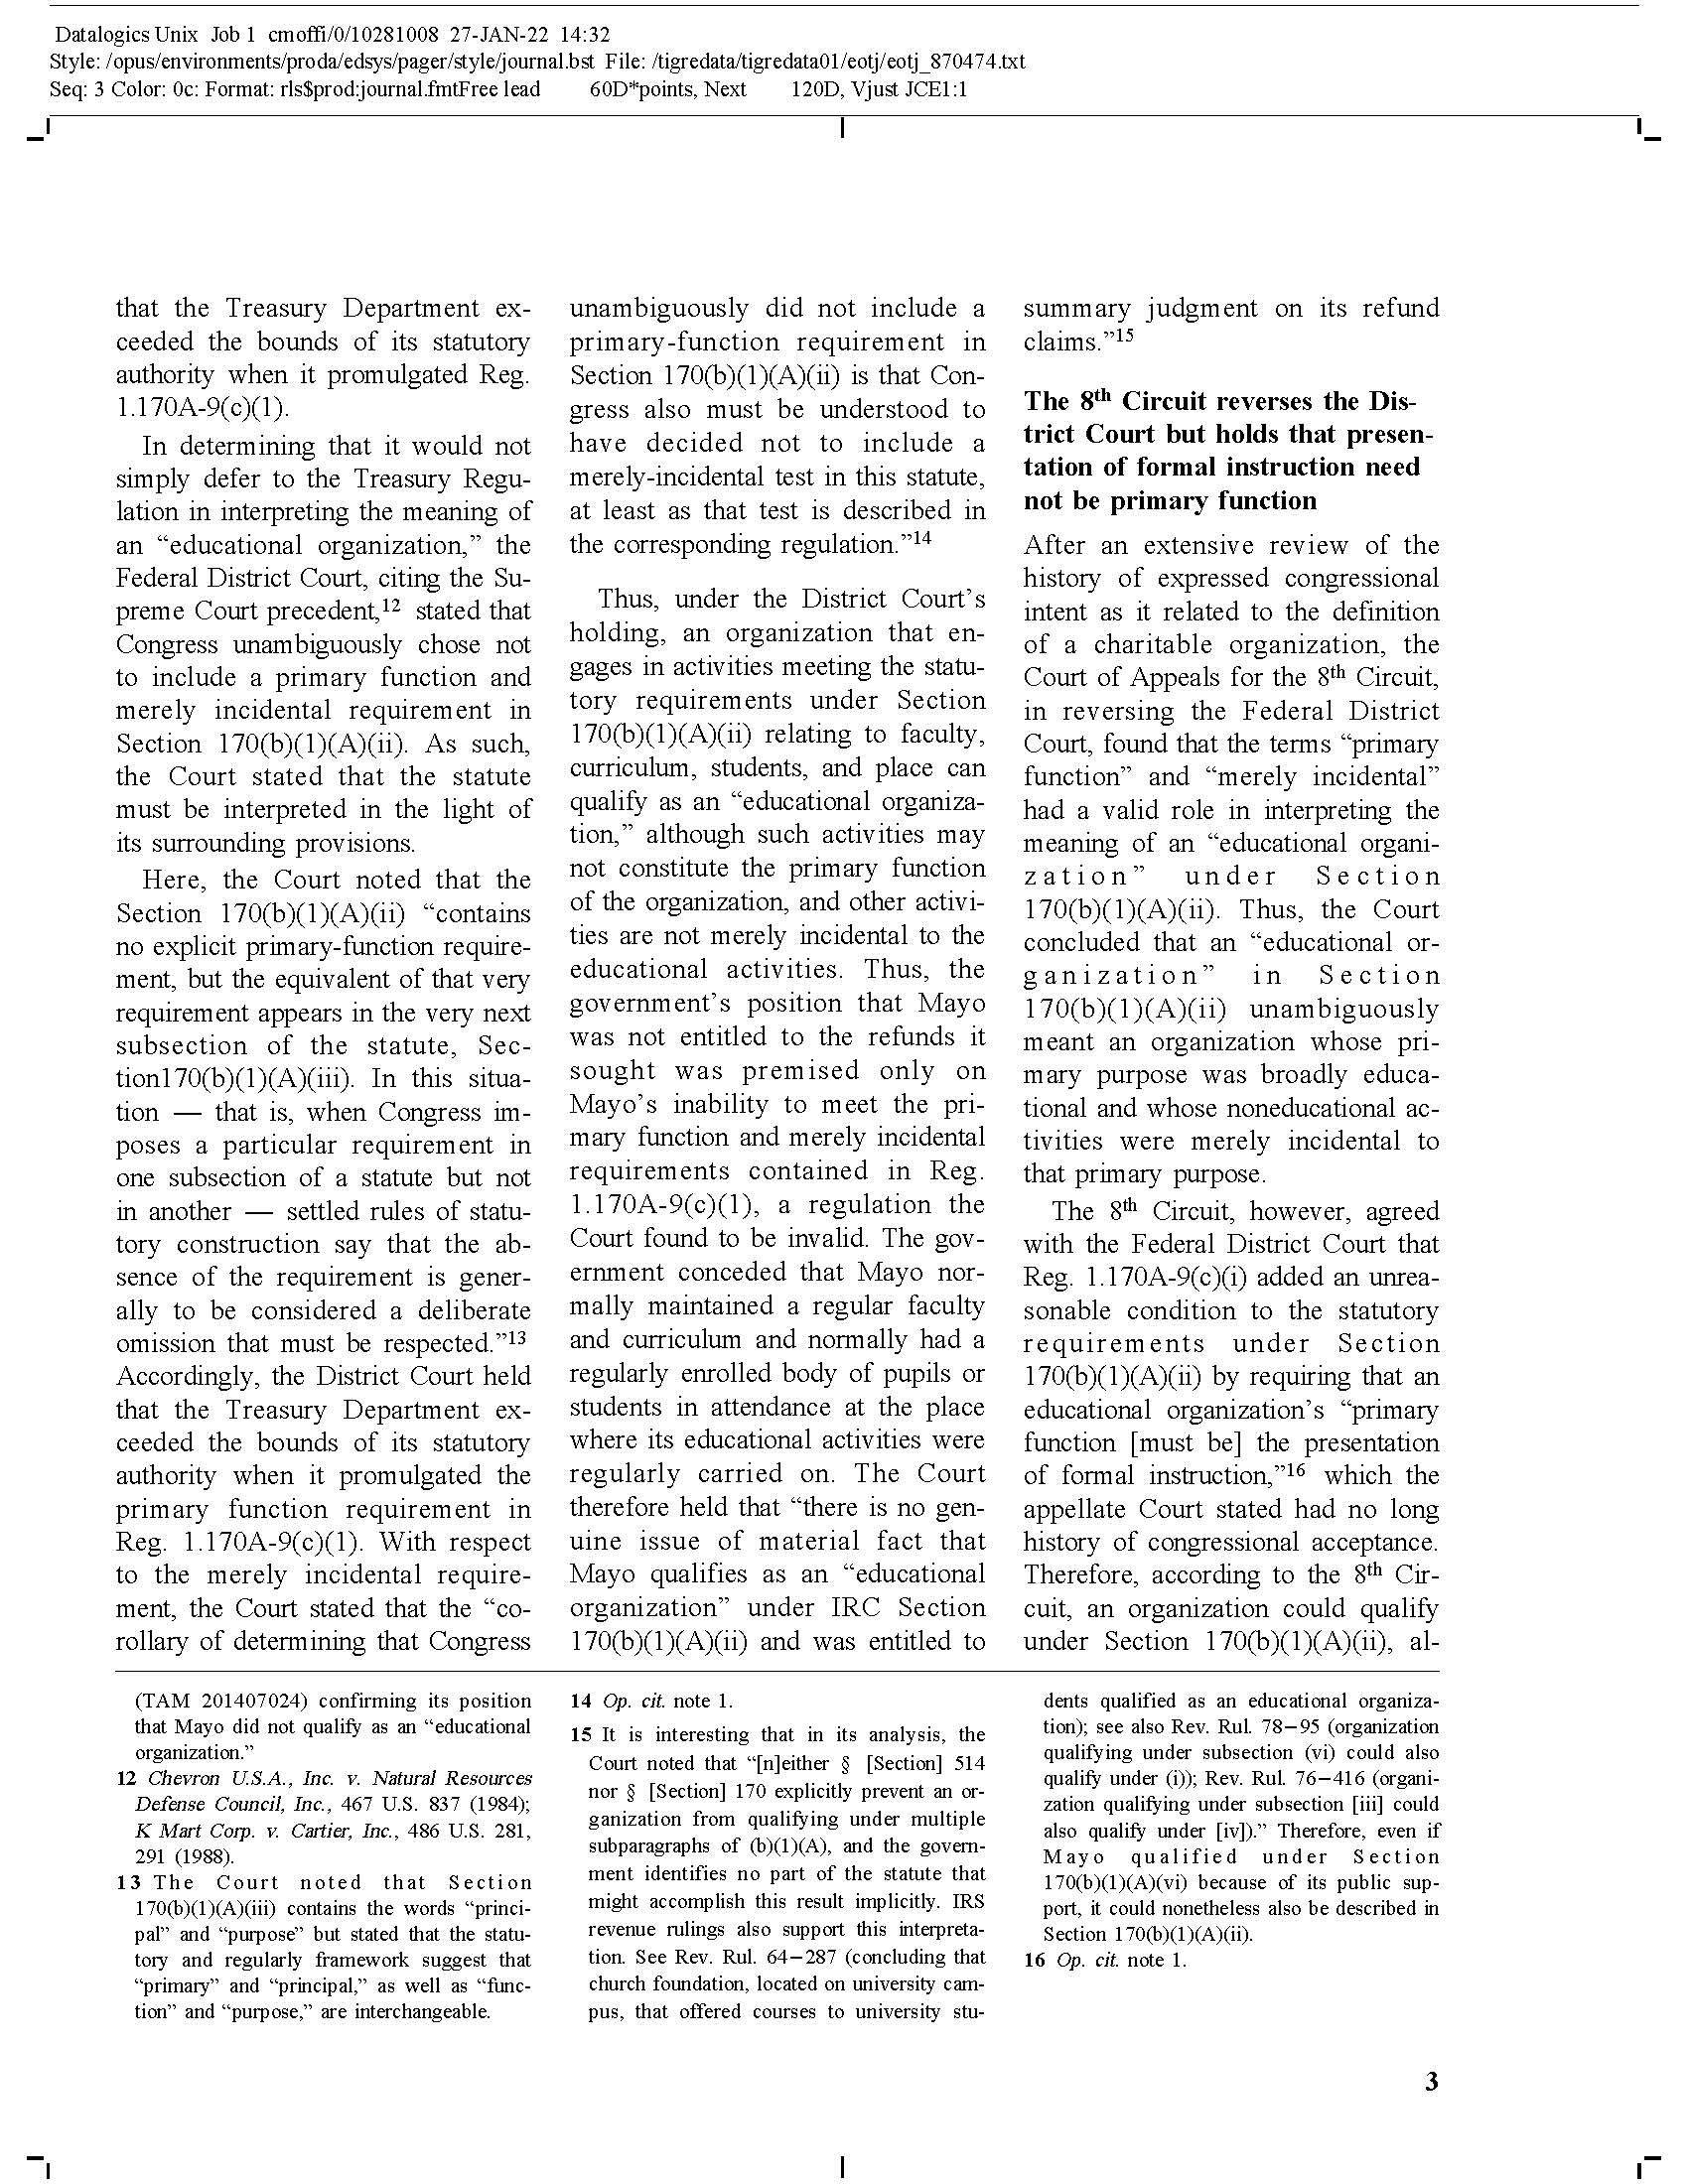 Galleys for Mayo Article_Page_3